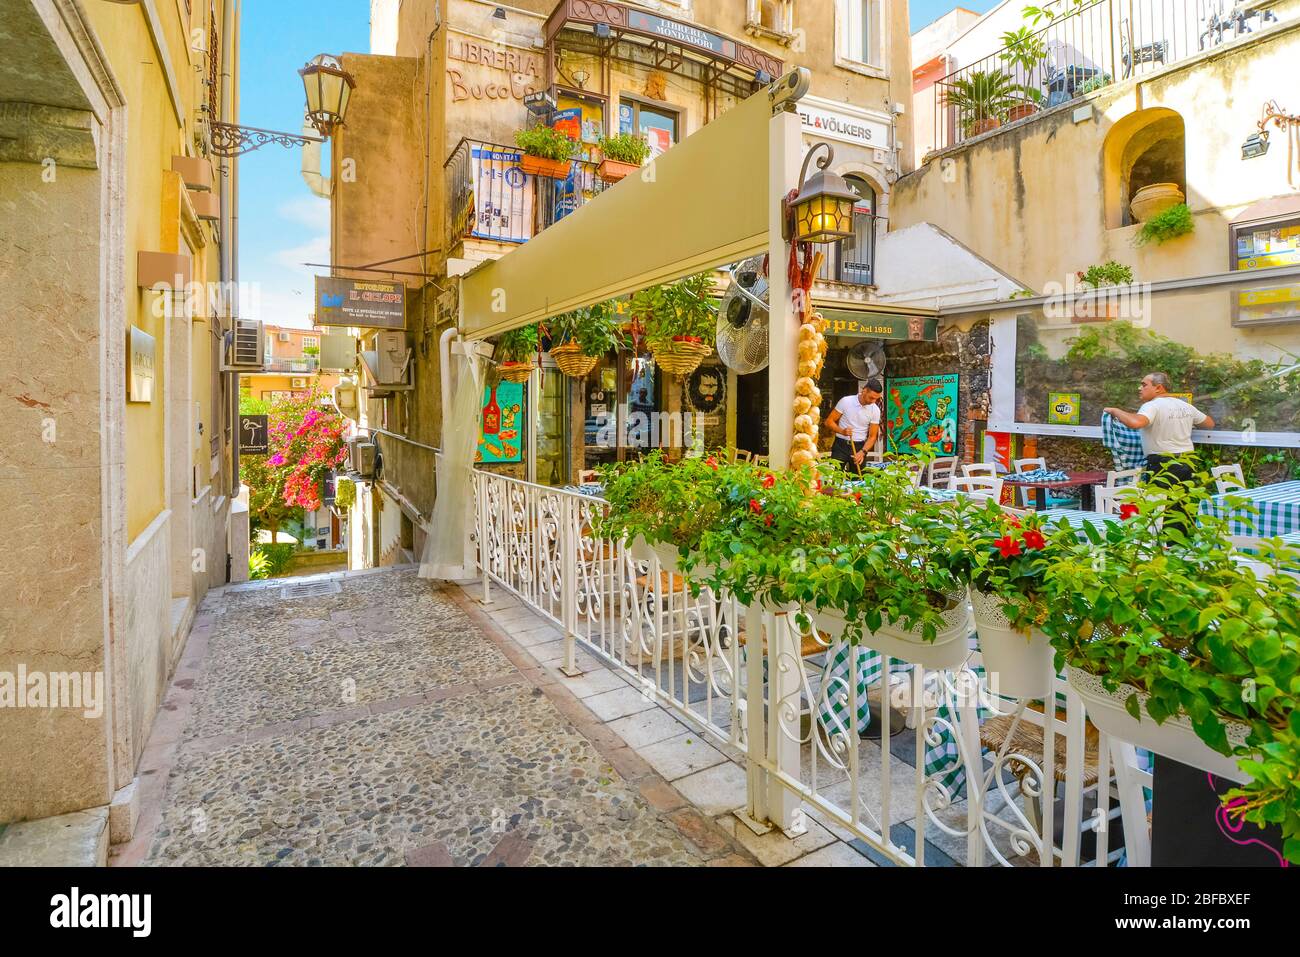 Workers prepare at a colorful Italian cafe restaurant along the touristic street through the resort town of Taormina, Italy, on the island of Sicily. Stock Photo